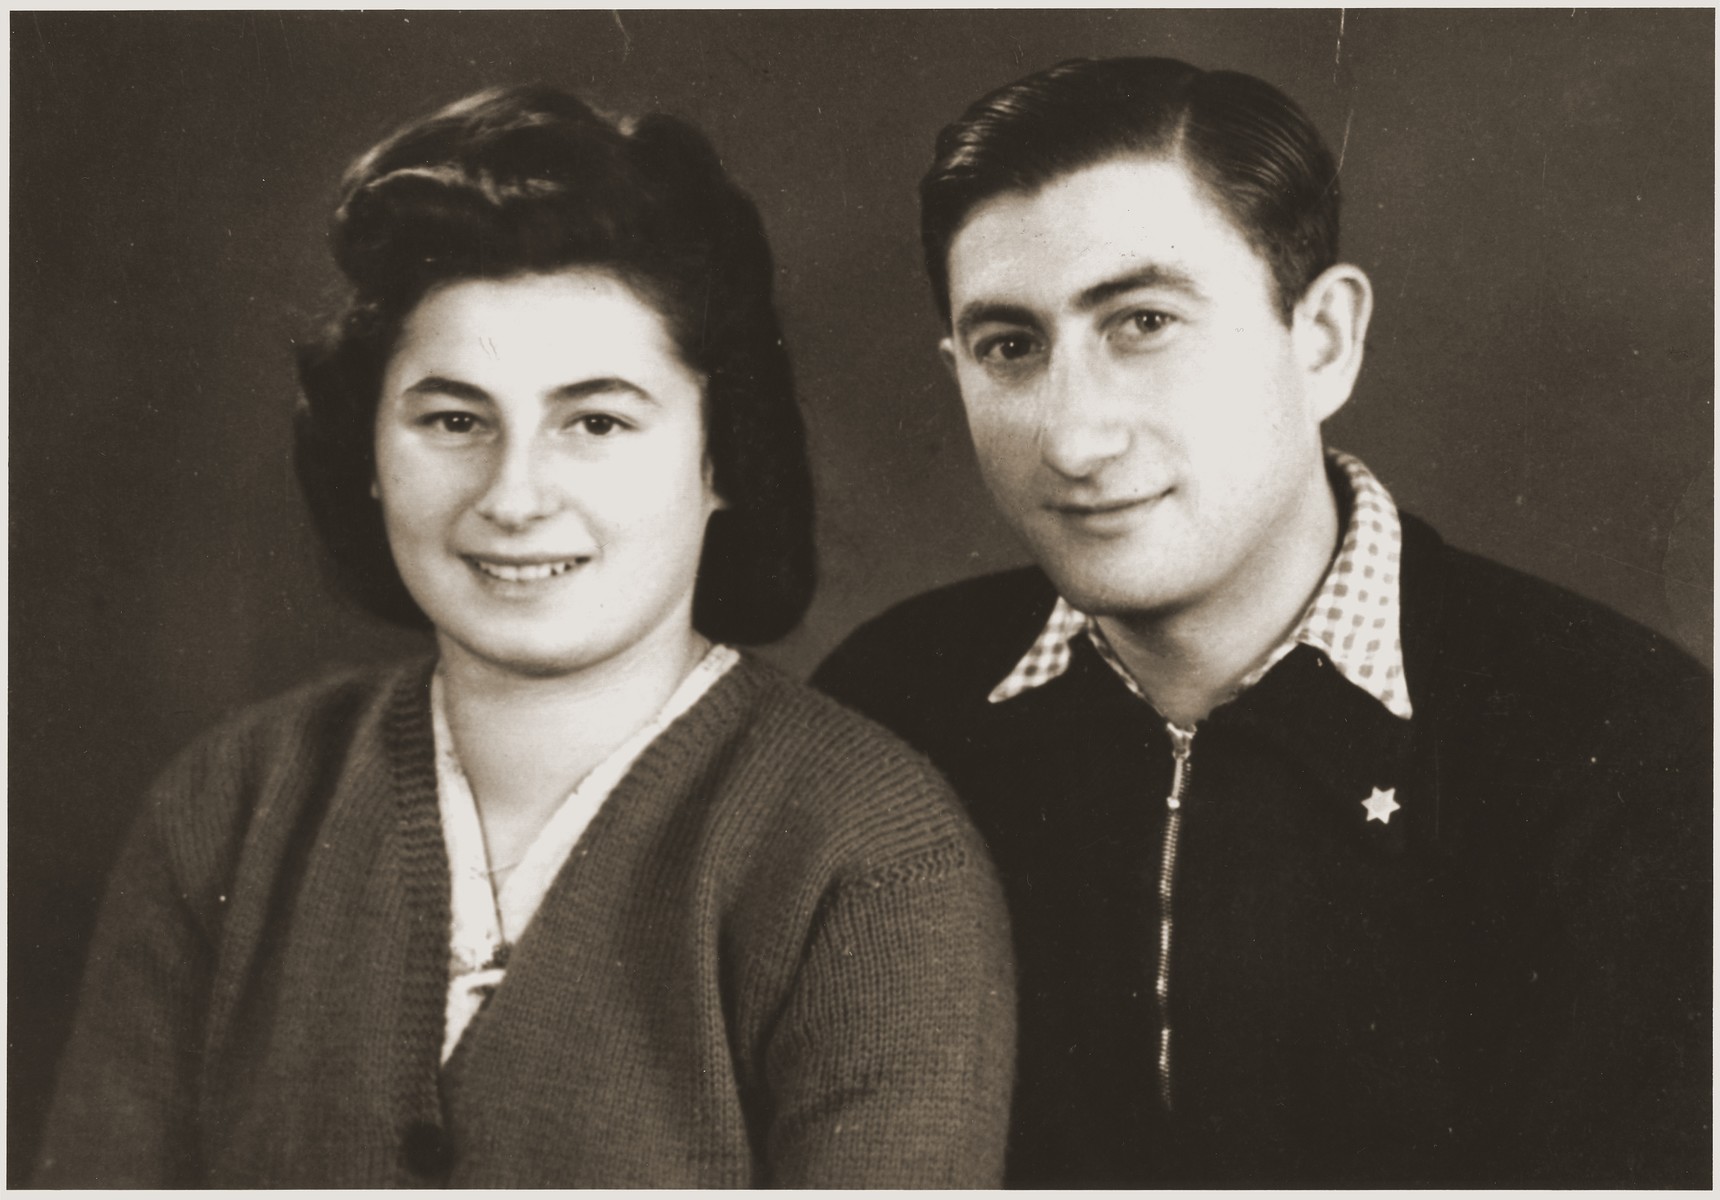 Studio portrait of two young Jewish DPs in the New Palestine displaced persons camp near Salzburg.

Pictured are Halina Goldberg, a survivor of the death march from Helbrechts to Volary, and Moniek Rozen.